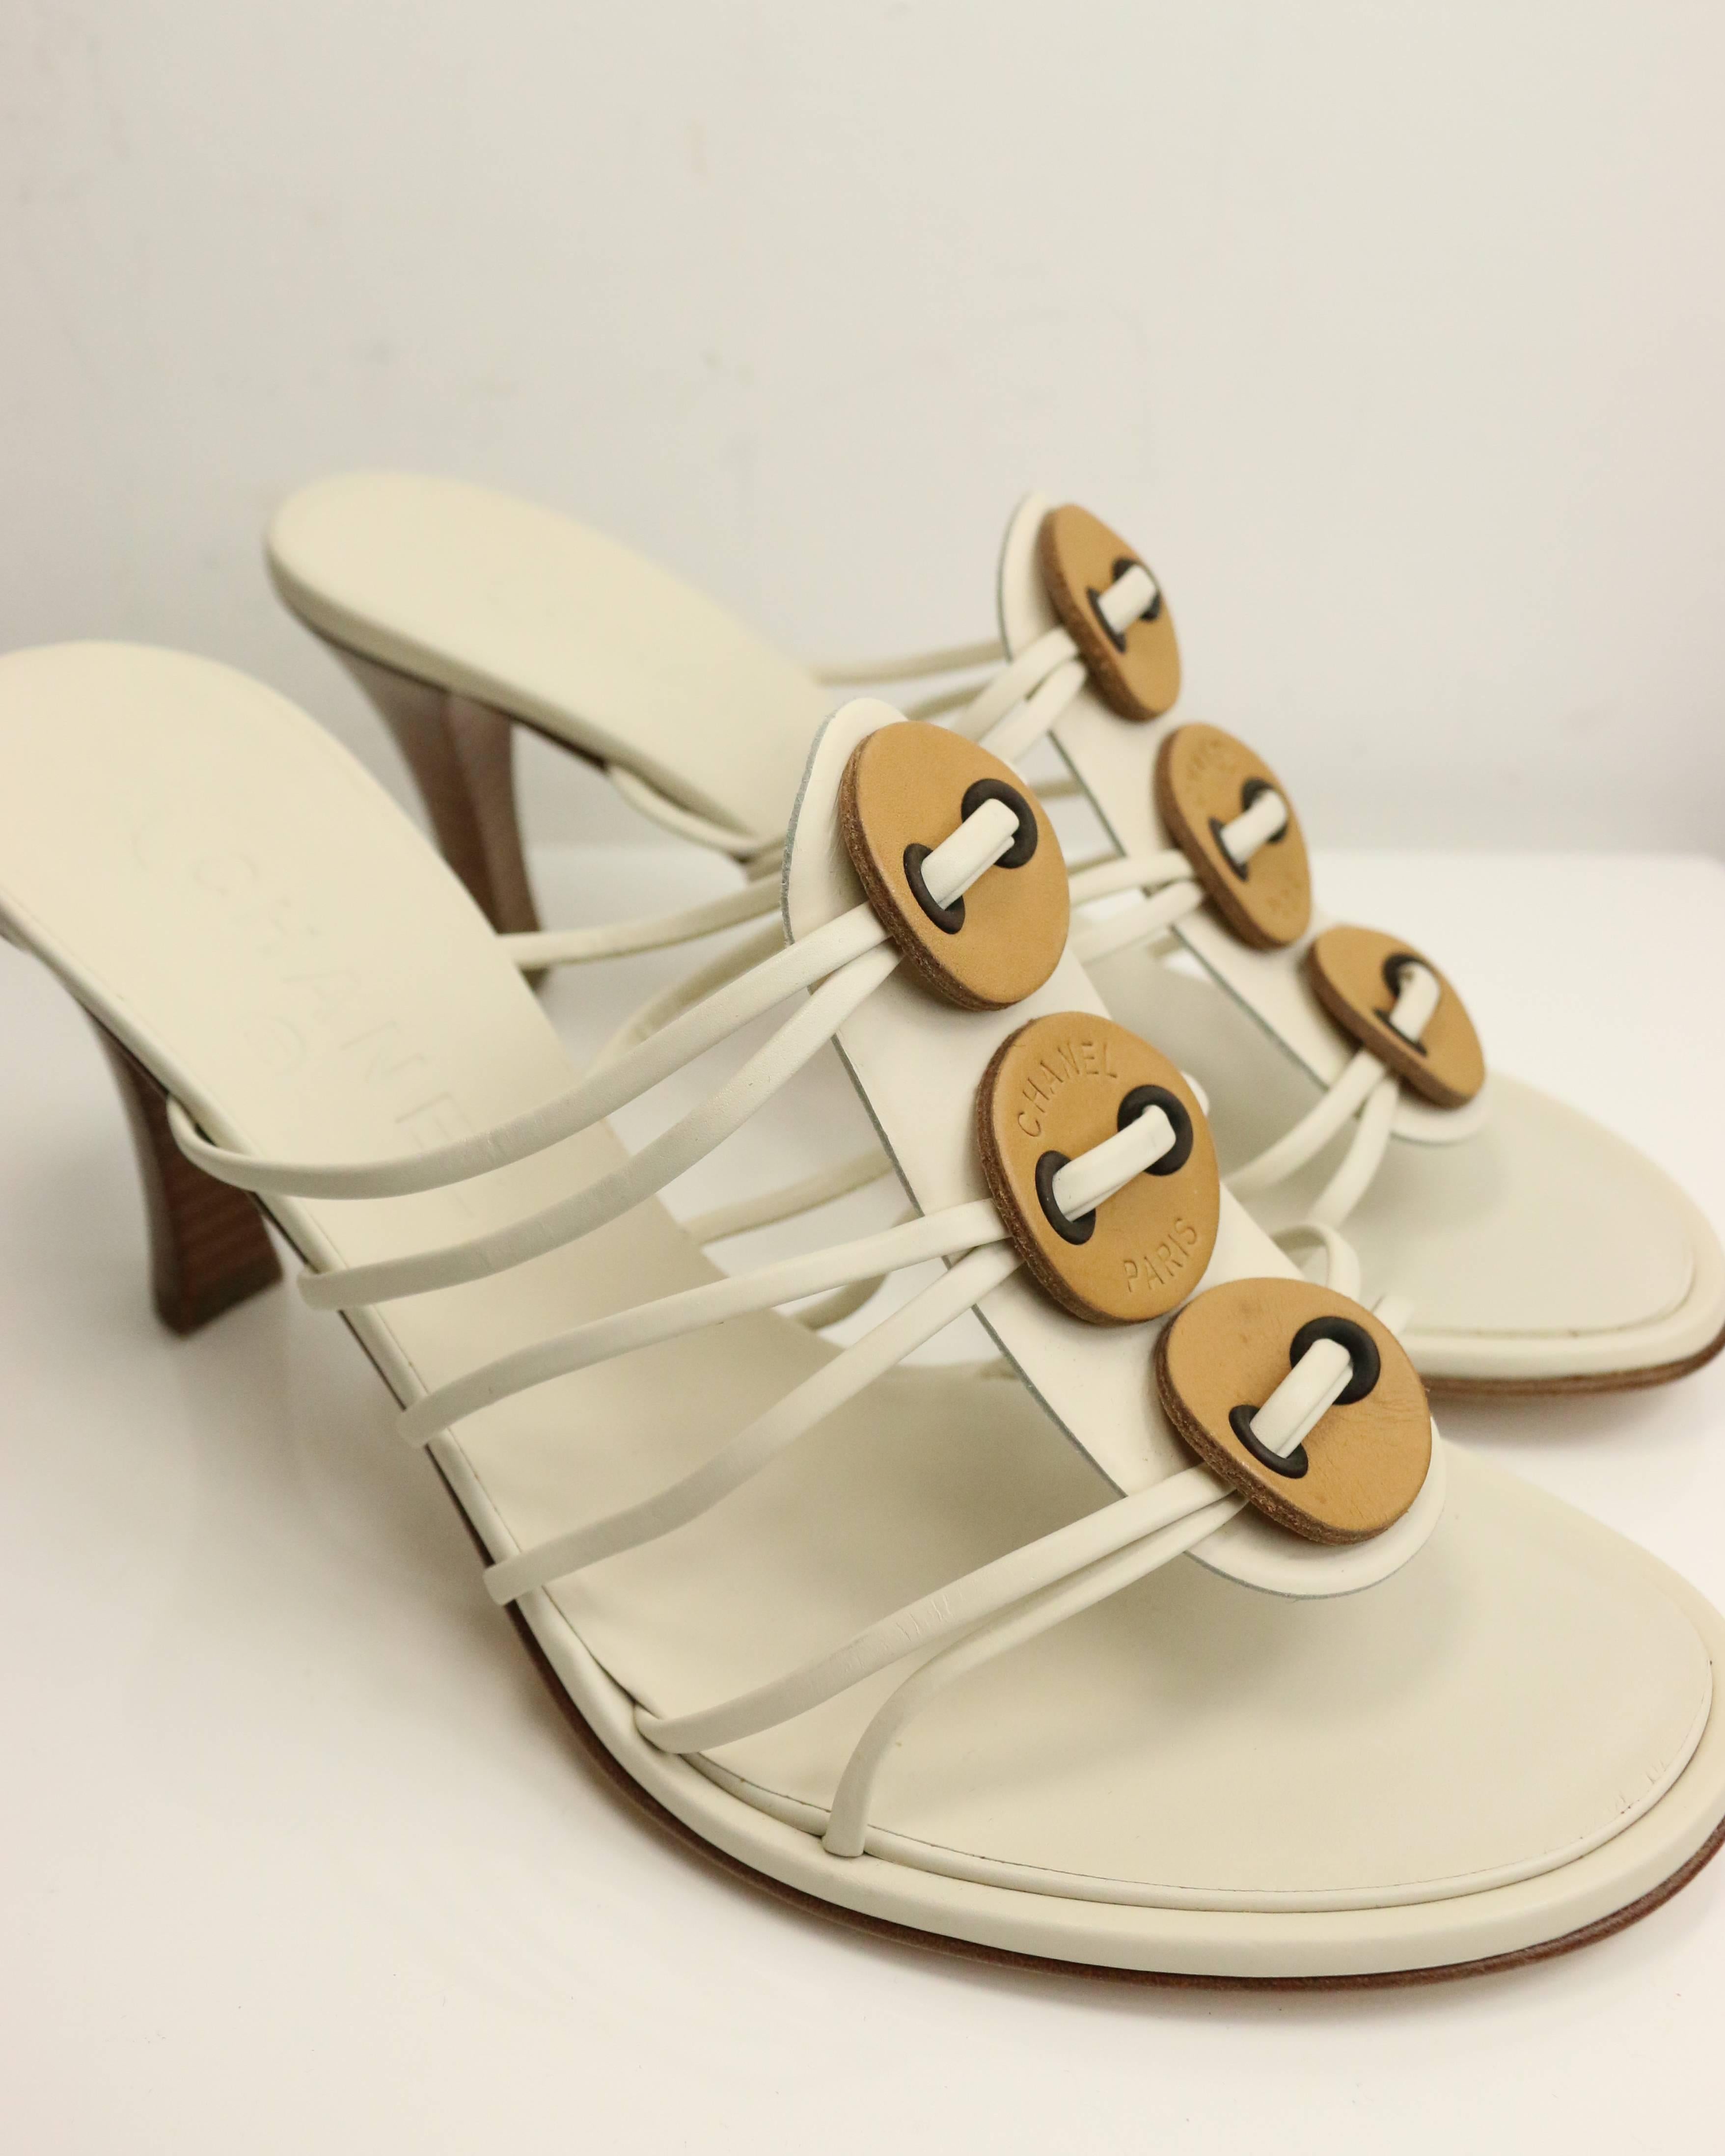 - Vintage 90s Chanel sand beige open toe sandals. 

- Leather quilted sole. 

- Size 38.5. 

- Includes: dust bag. 
